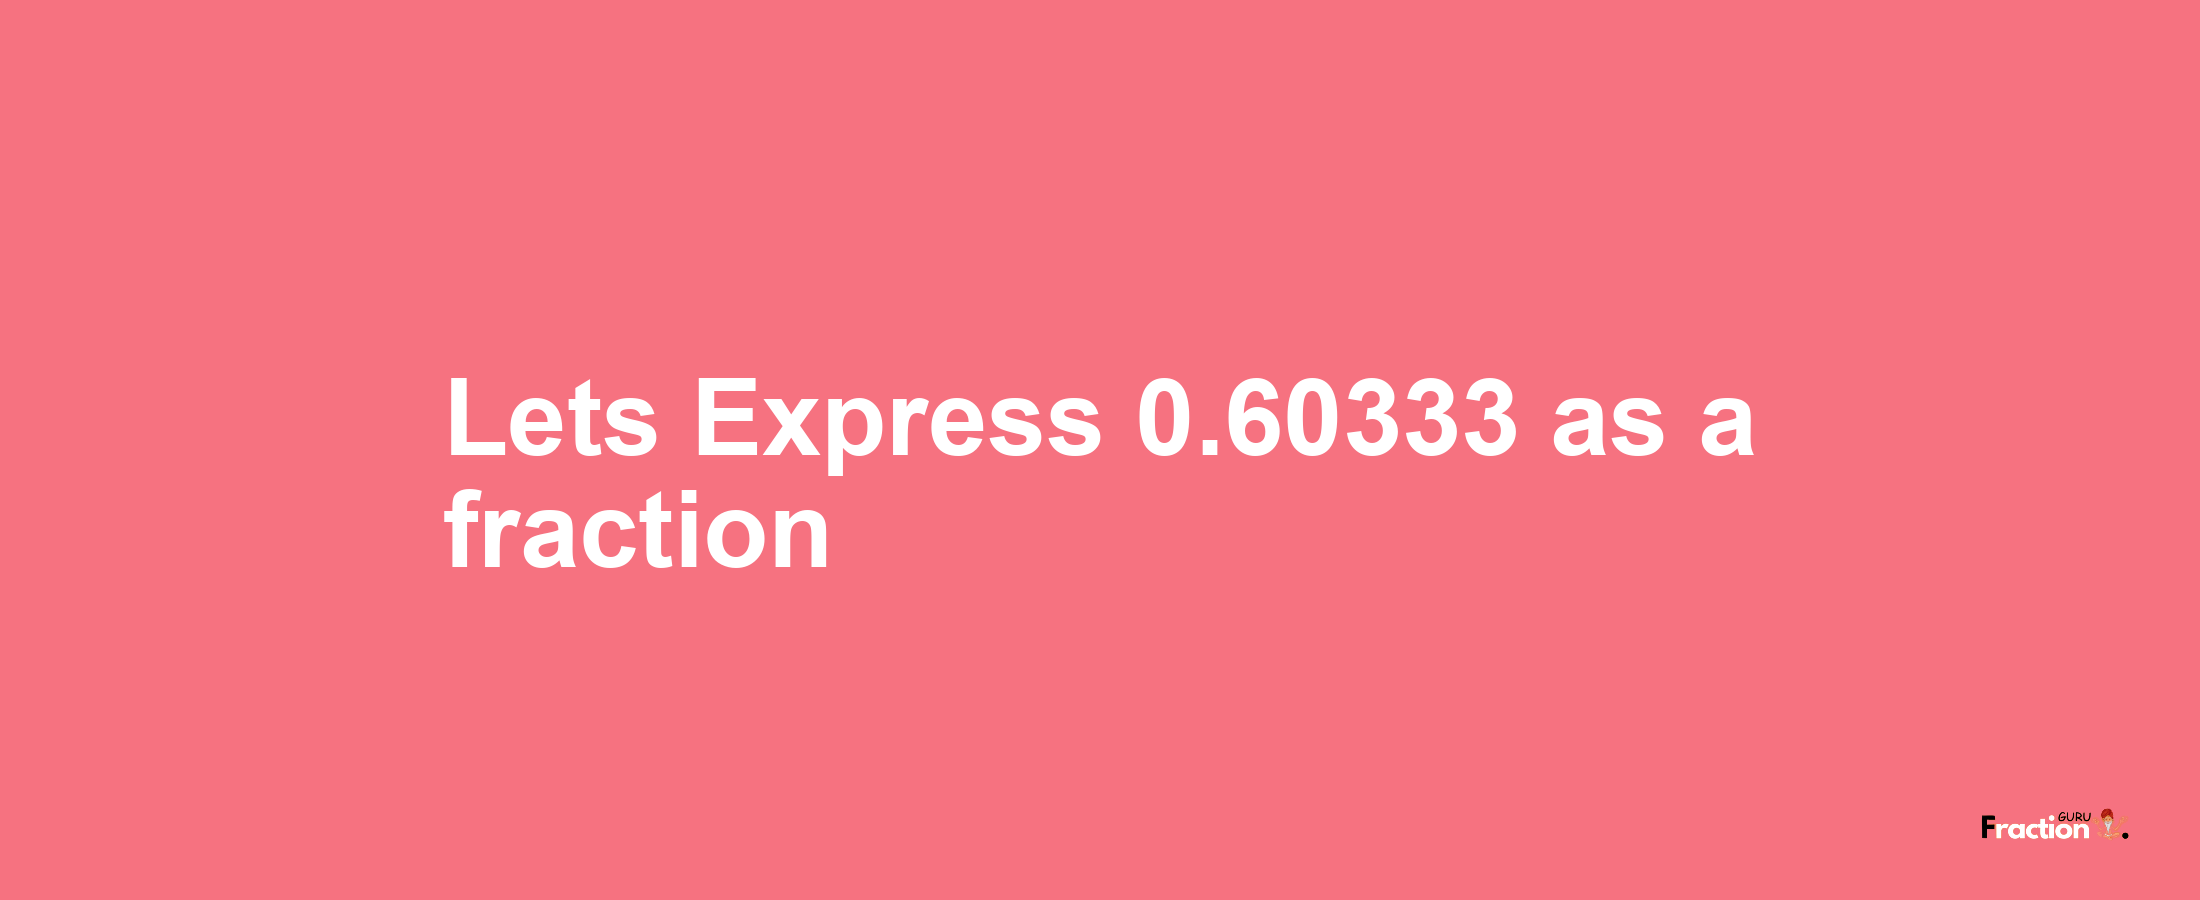 Lets Express 0.60333 as afraction